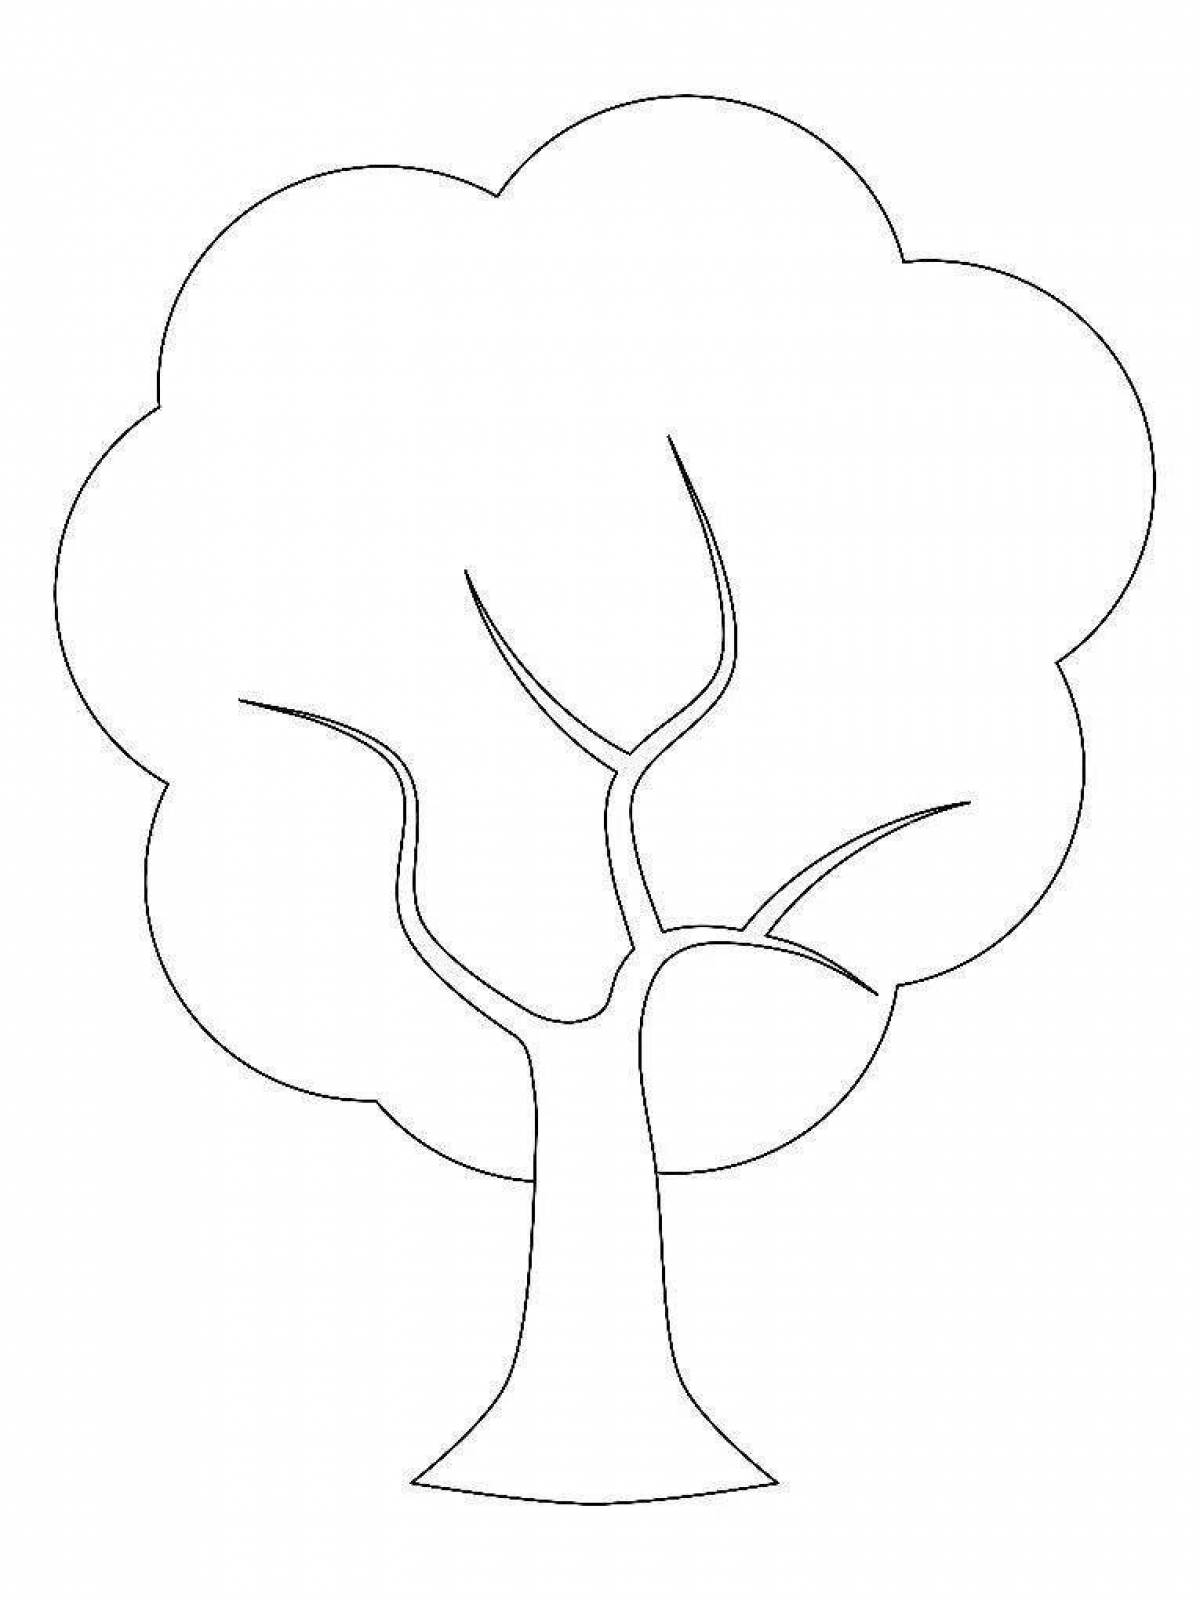 Mystic tree coloring page